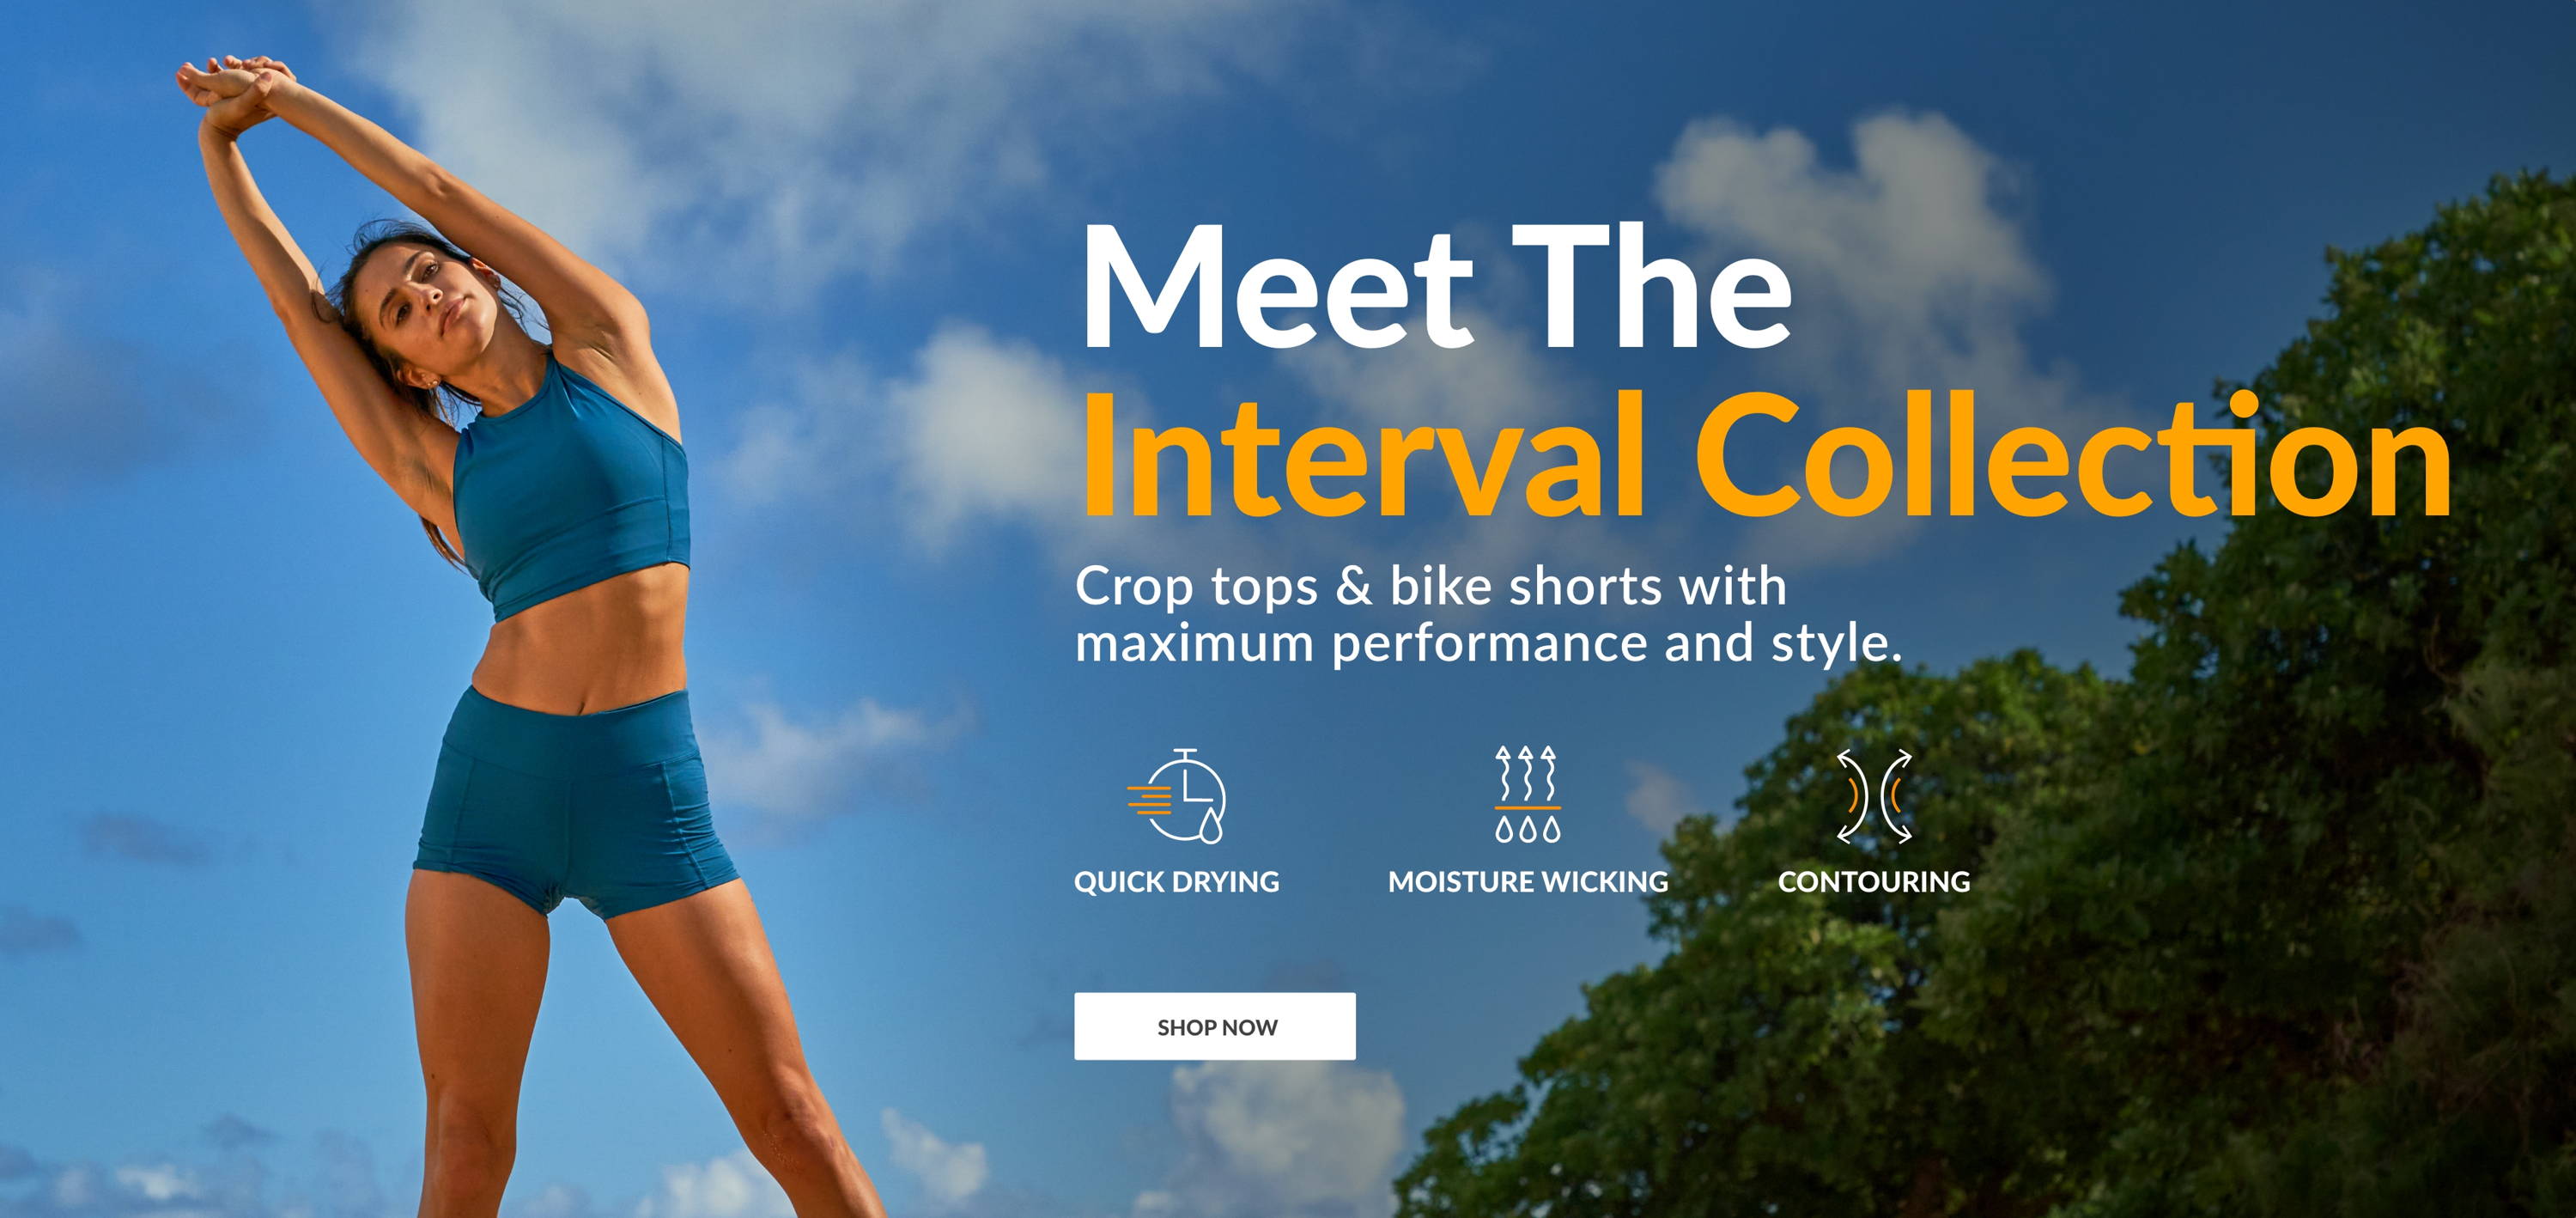 Meet the Interval Collection. Crop tops &  bike shorts with maximum performance and style. Quick Drying. Moisture Wicking. Contouring. SHOP NOW